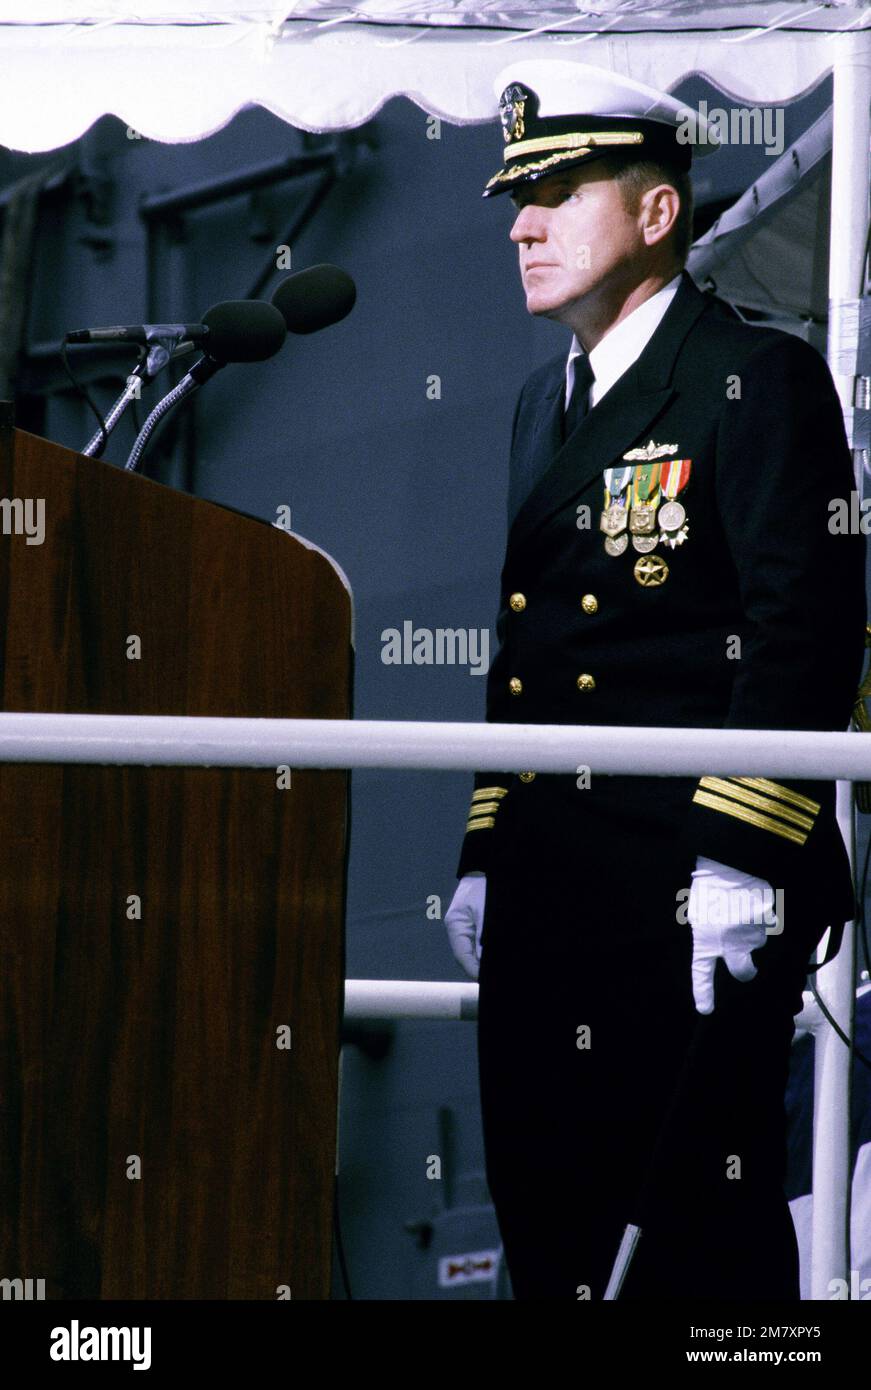 CDR Floyston A. Weeks, commander of the guided missile frigate USS AUBREY FITCH (FFG-34), stands before the speaker's podium during the ship's commissioning ceremony. Base: Bath State: Maine (ME) Country: United States Of America (USA) Stock Photo